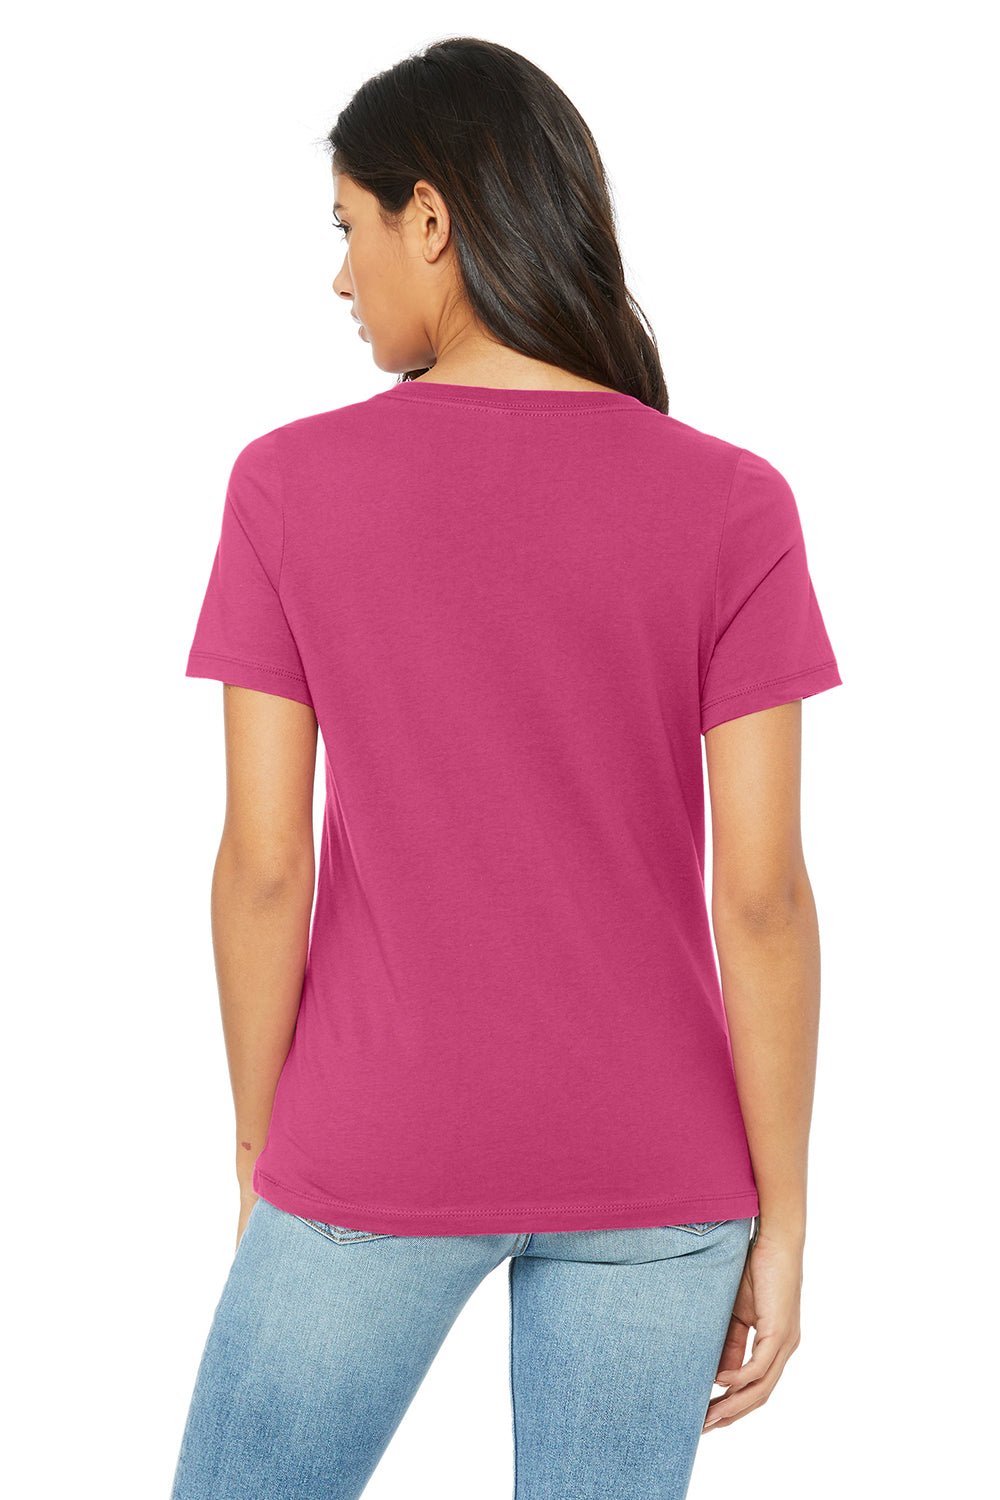 Bella + Canvas BC6405/6405 Womens Relaxed Jersey Short Sleeve V-Neck T-Shirt Berry Pink Model Back